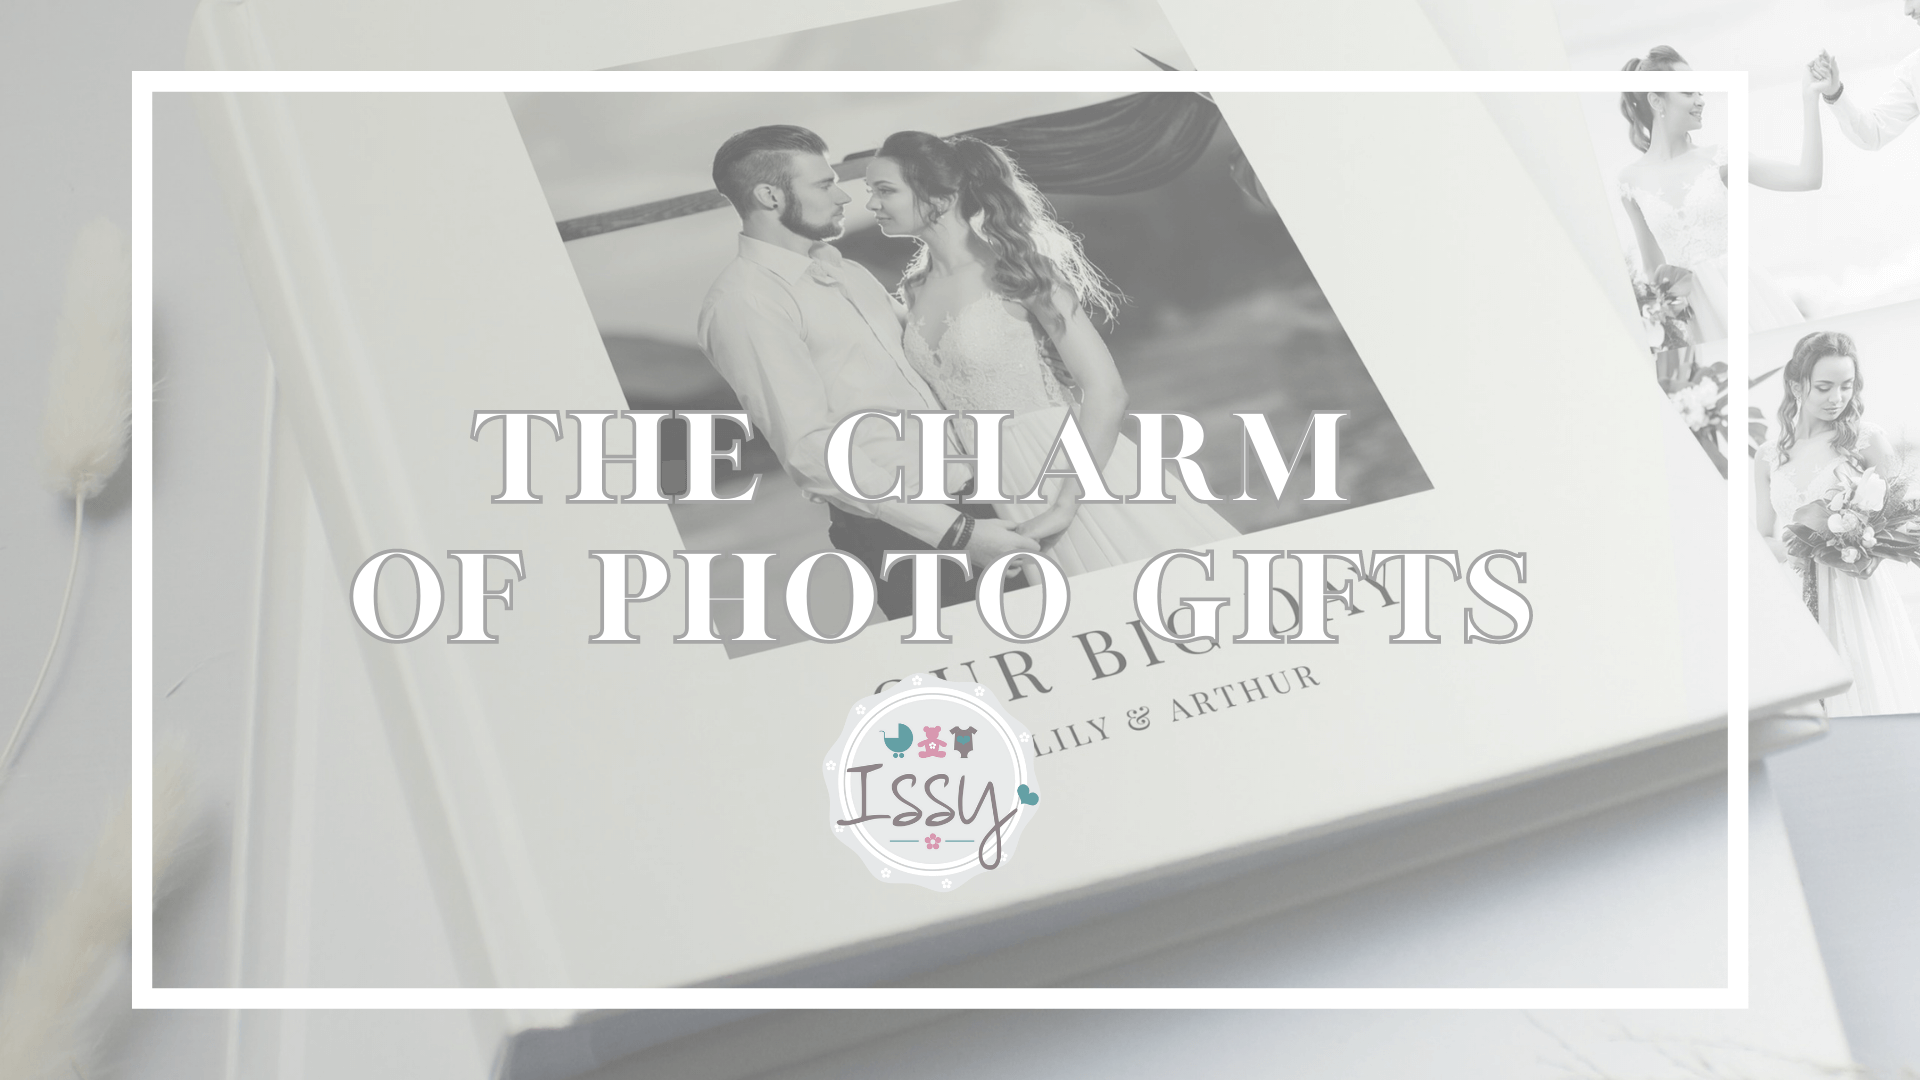 Memories that Last: The Charm of Photo Gifts